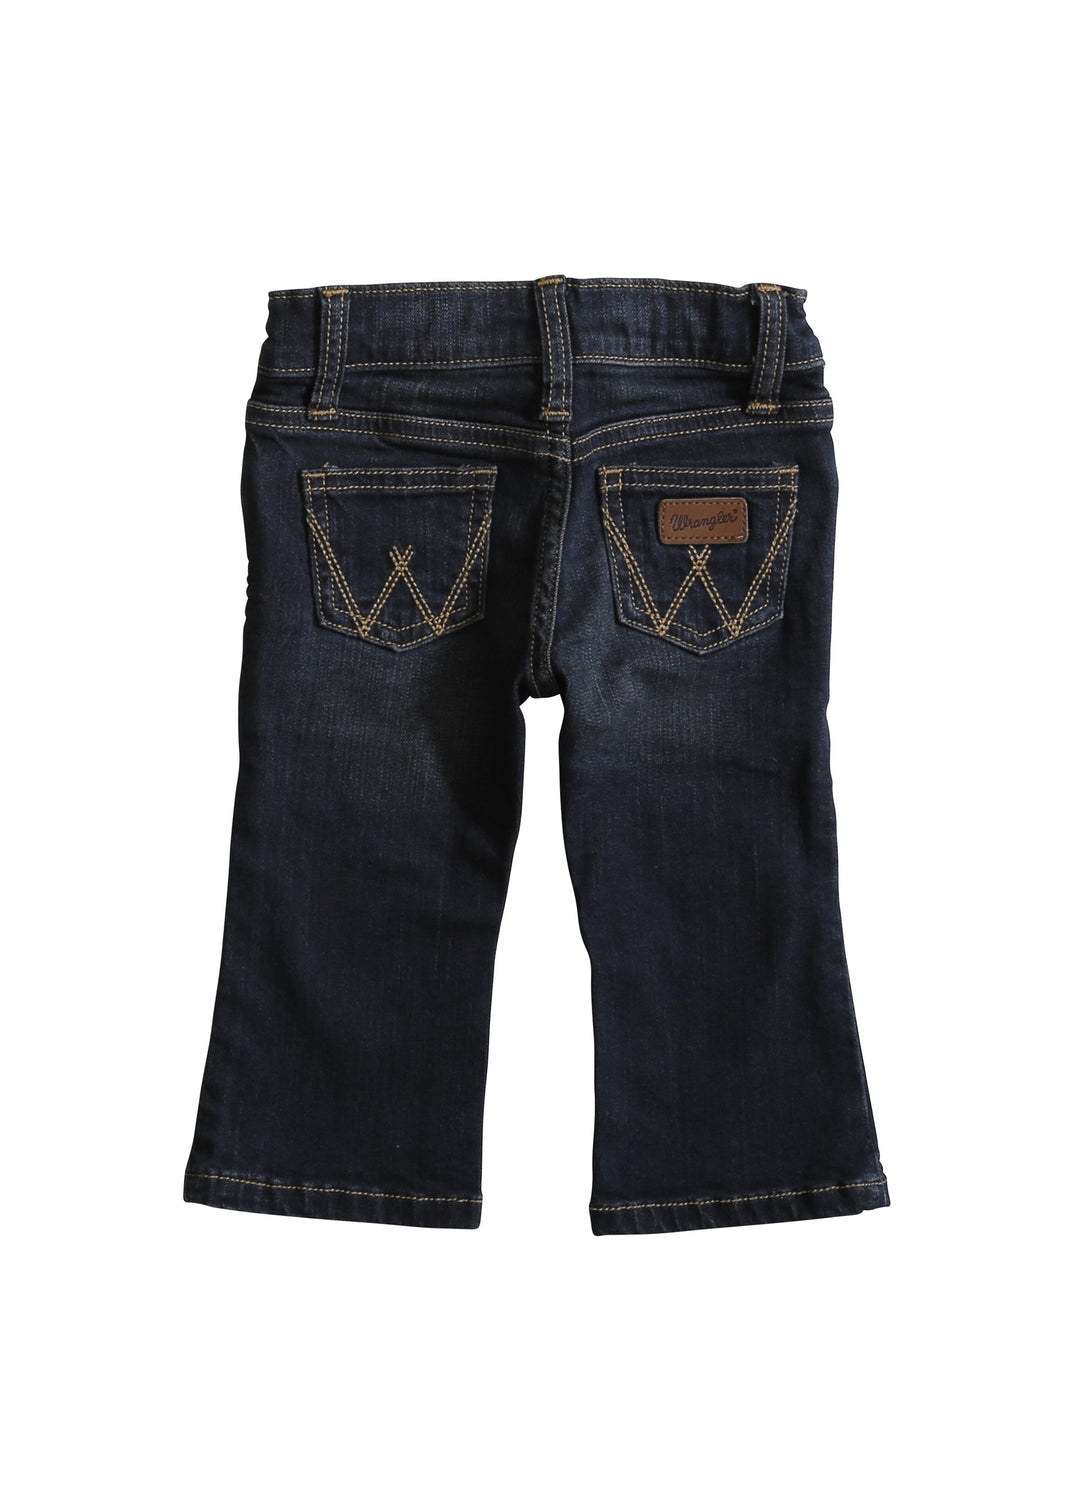 Wrangler - All Round Baby Western Jeans